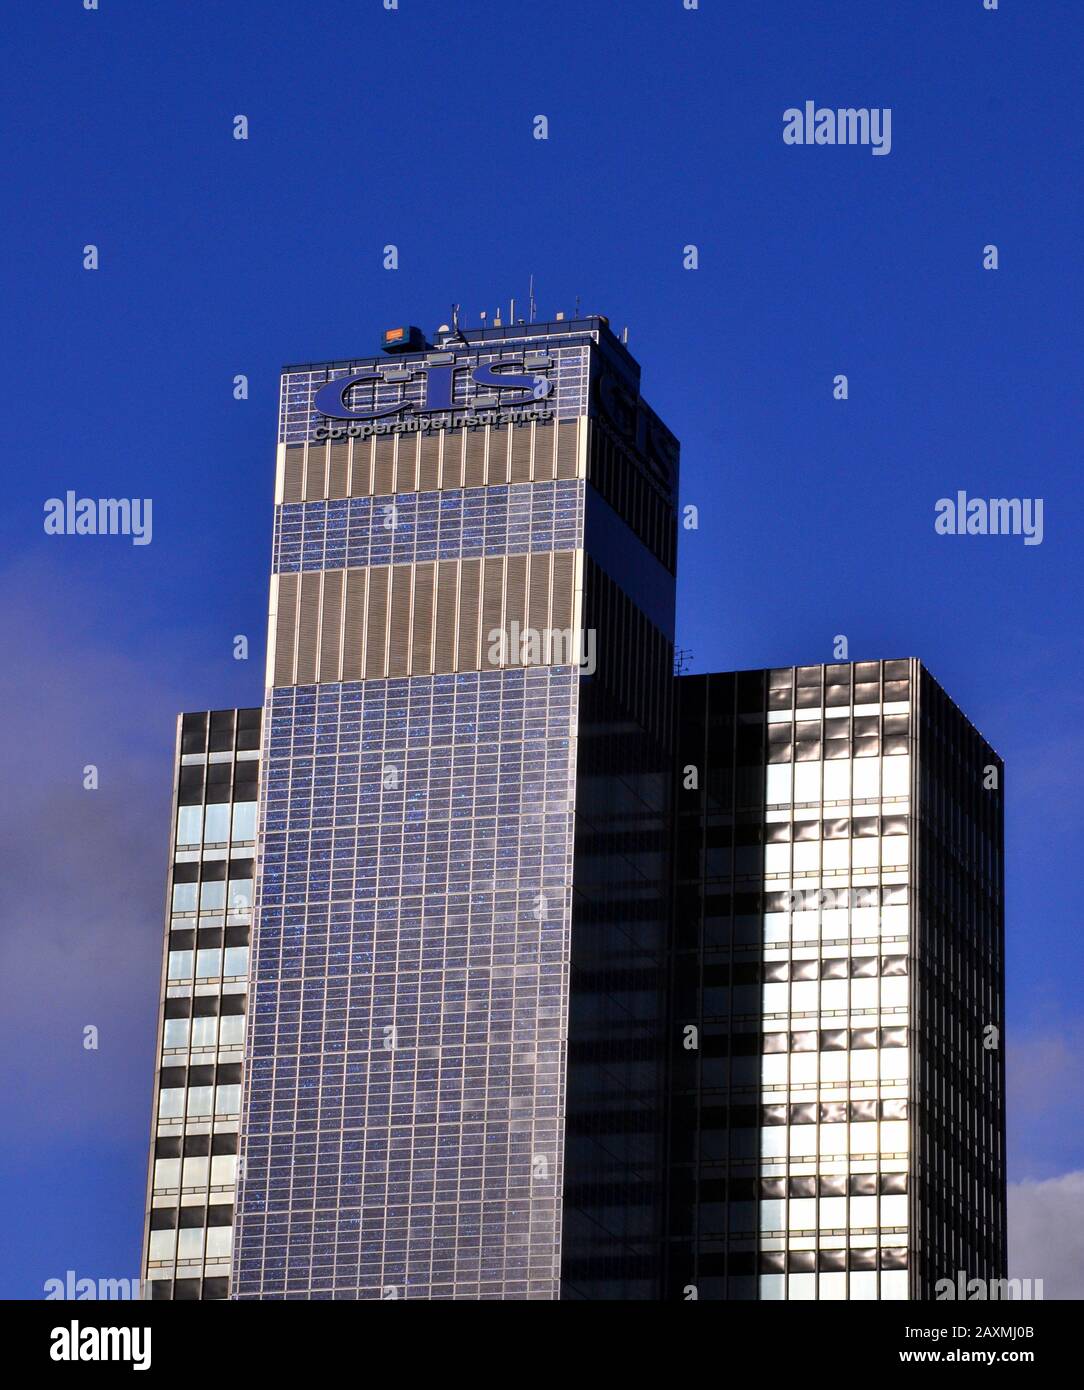 The CIS Tower, an office skyscraper on Miller Street in Manchester, England, against a blue sky. It was built by the Co-operative Group. Stock Photo